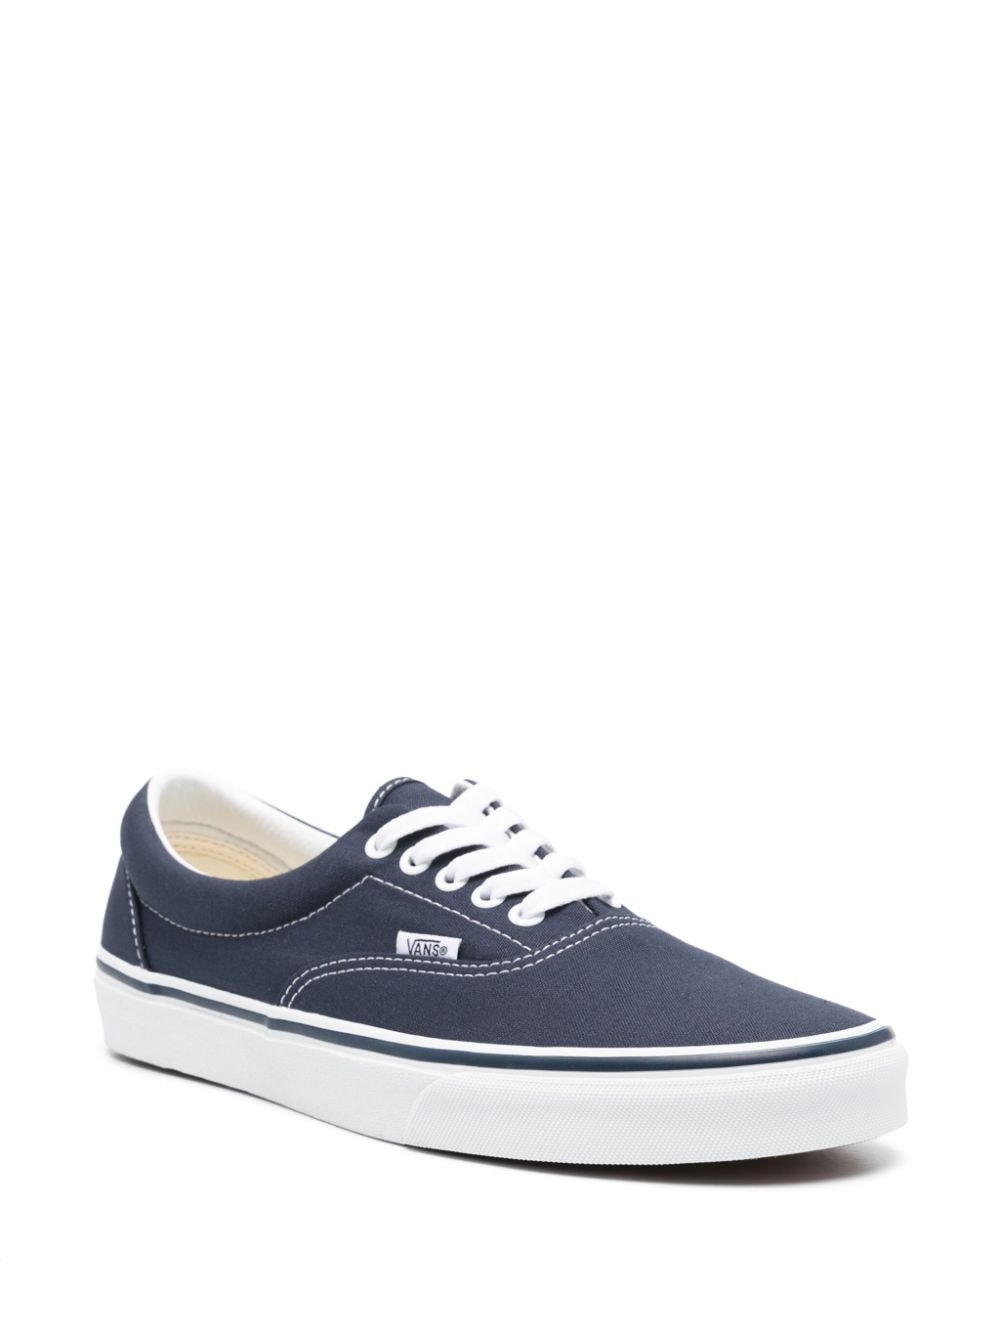 Authentic canvas sneakers<BR/><BR/><BR/>